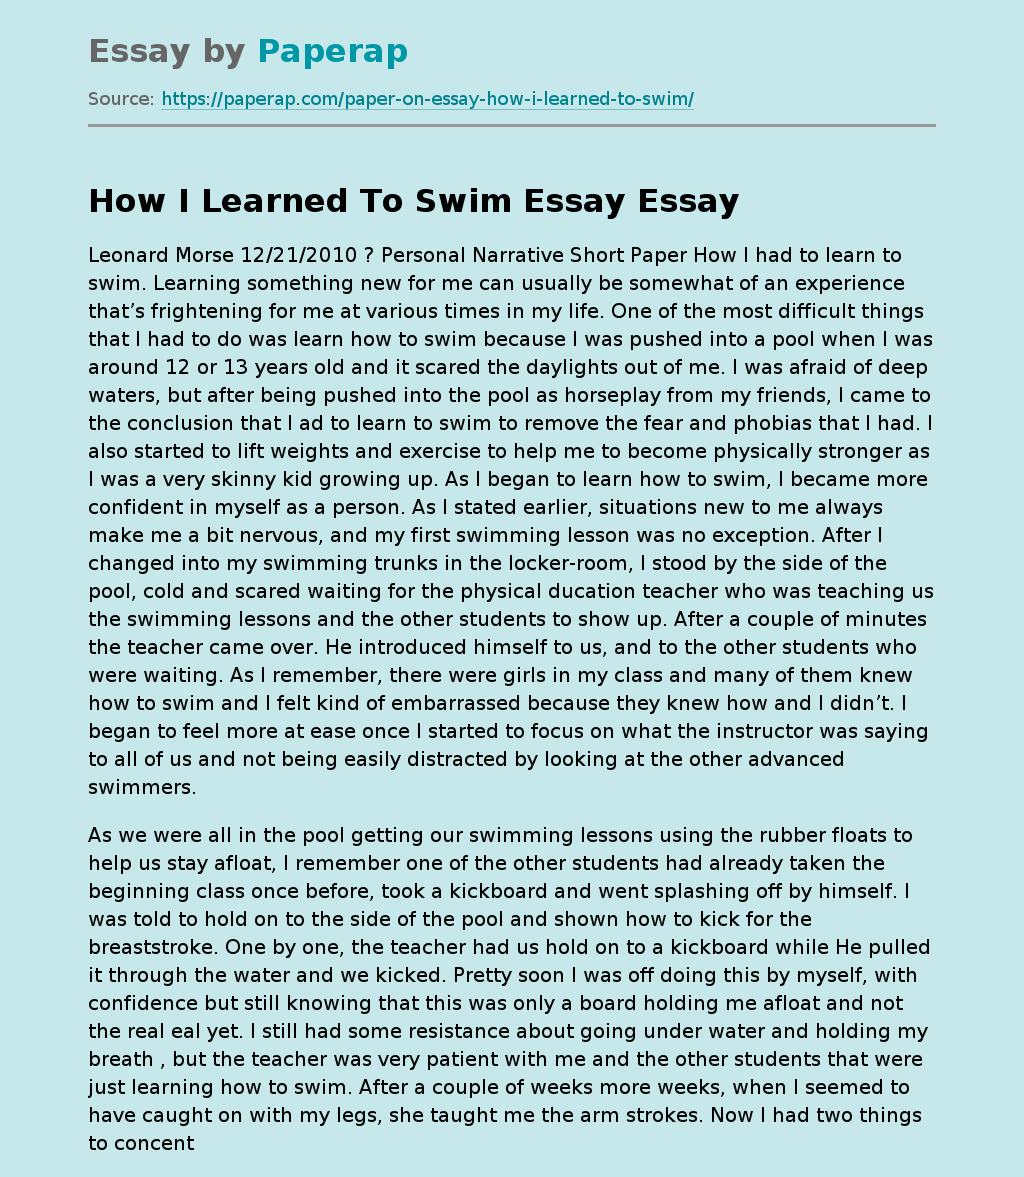 How I Learned To Swim Essay